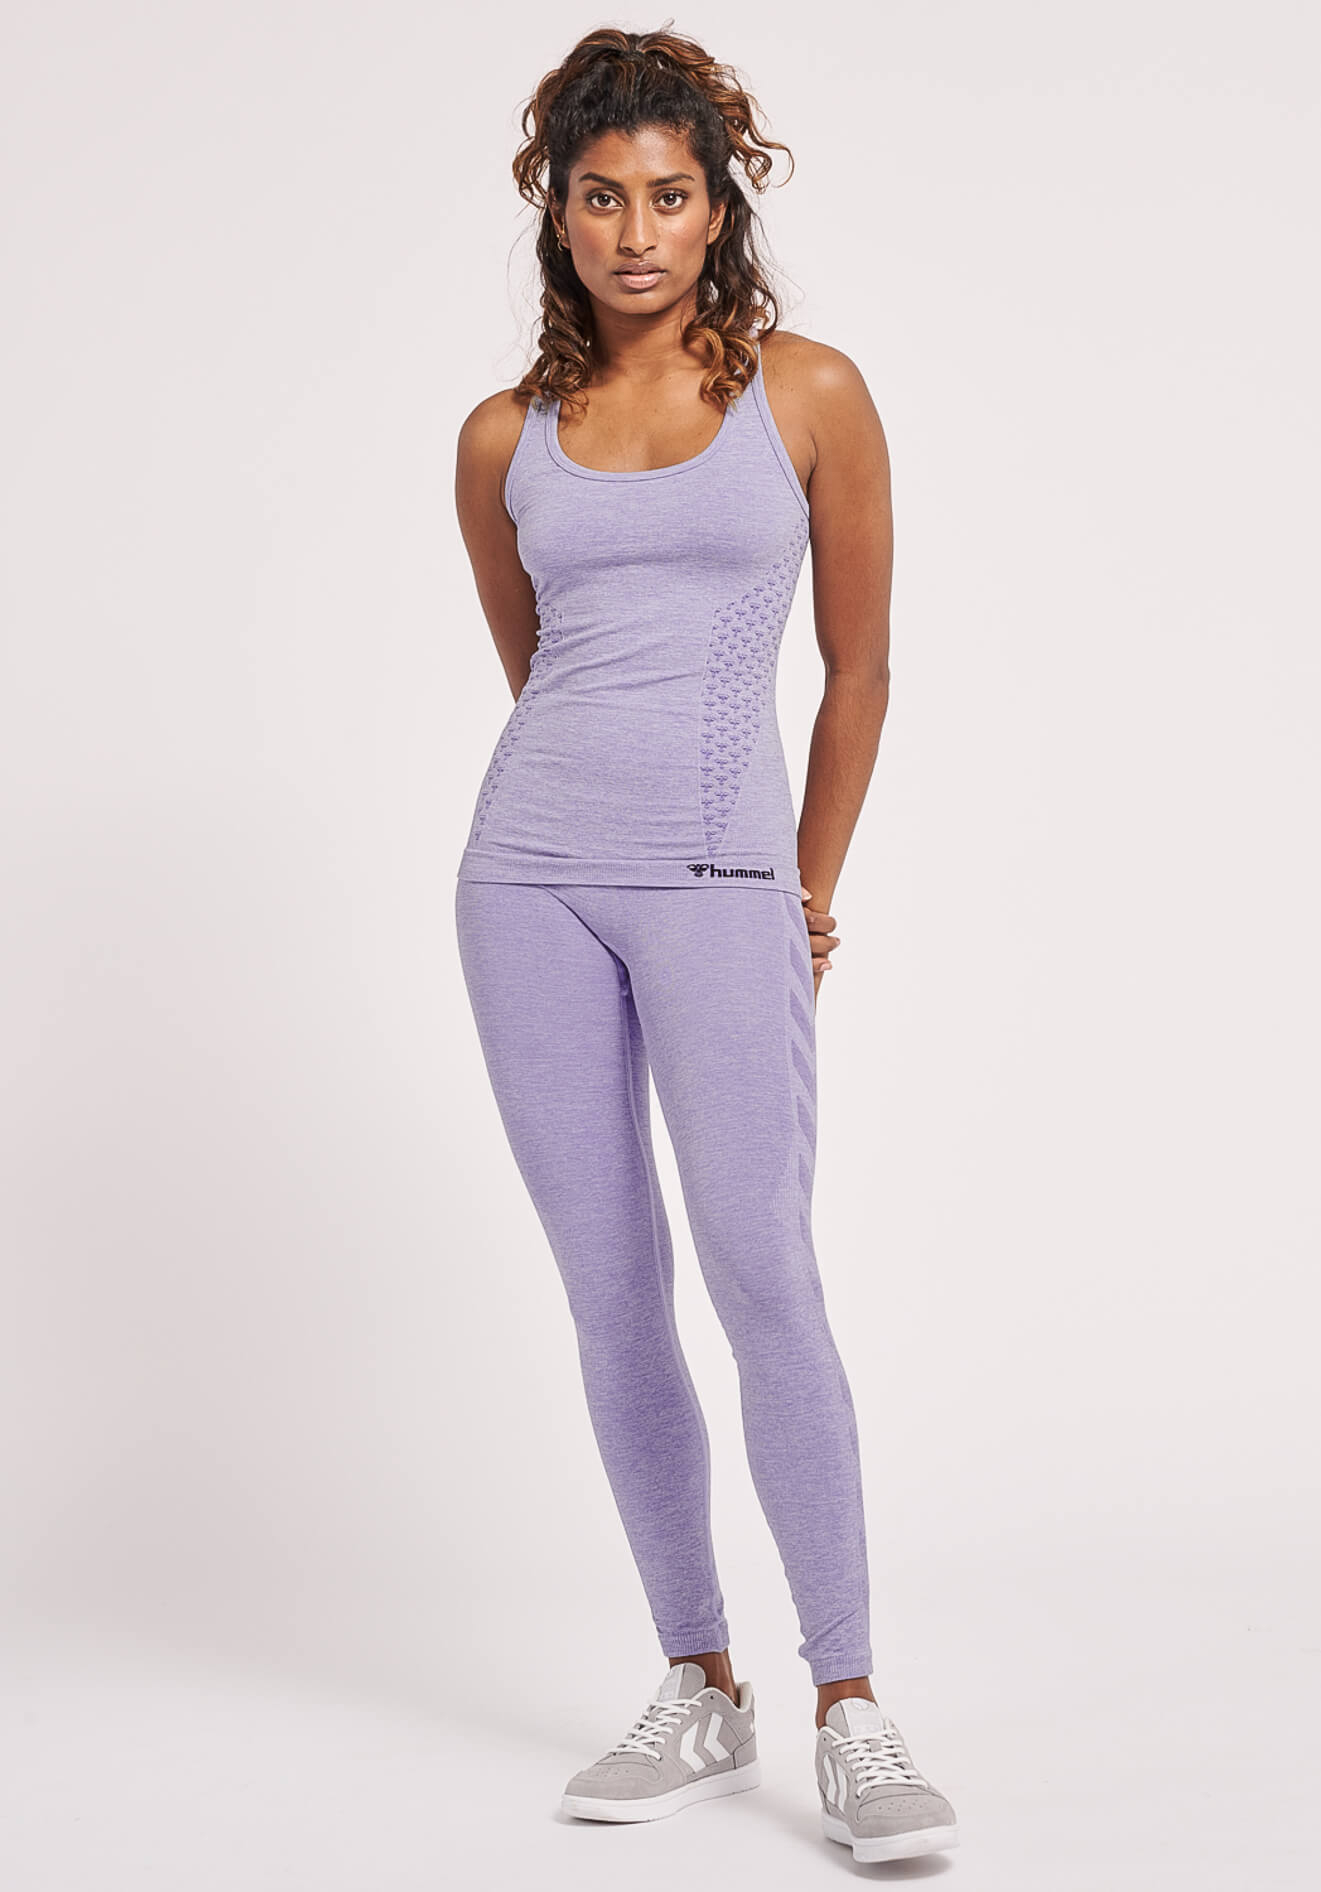 Hummel CI Seamless Tights - One More Rep